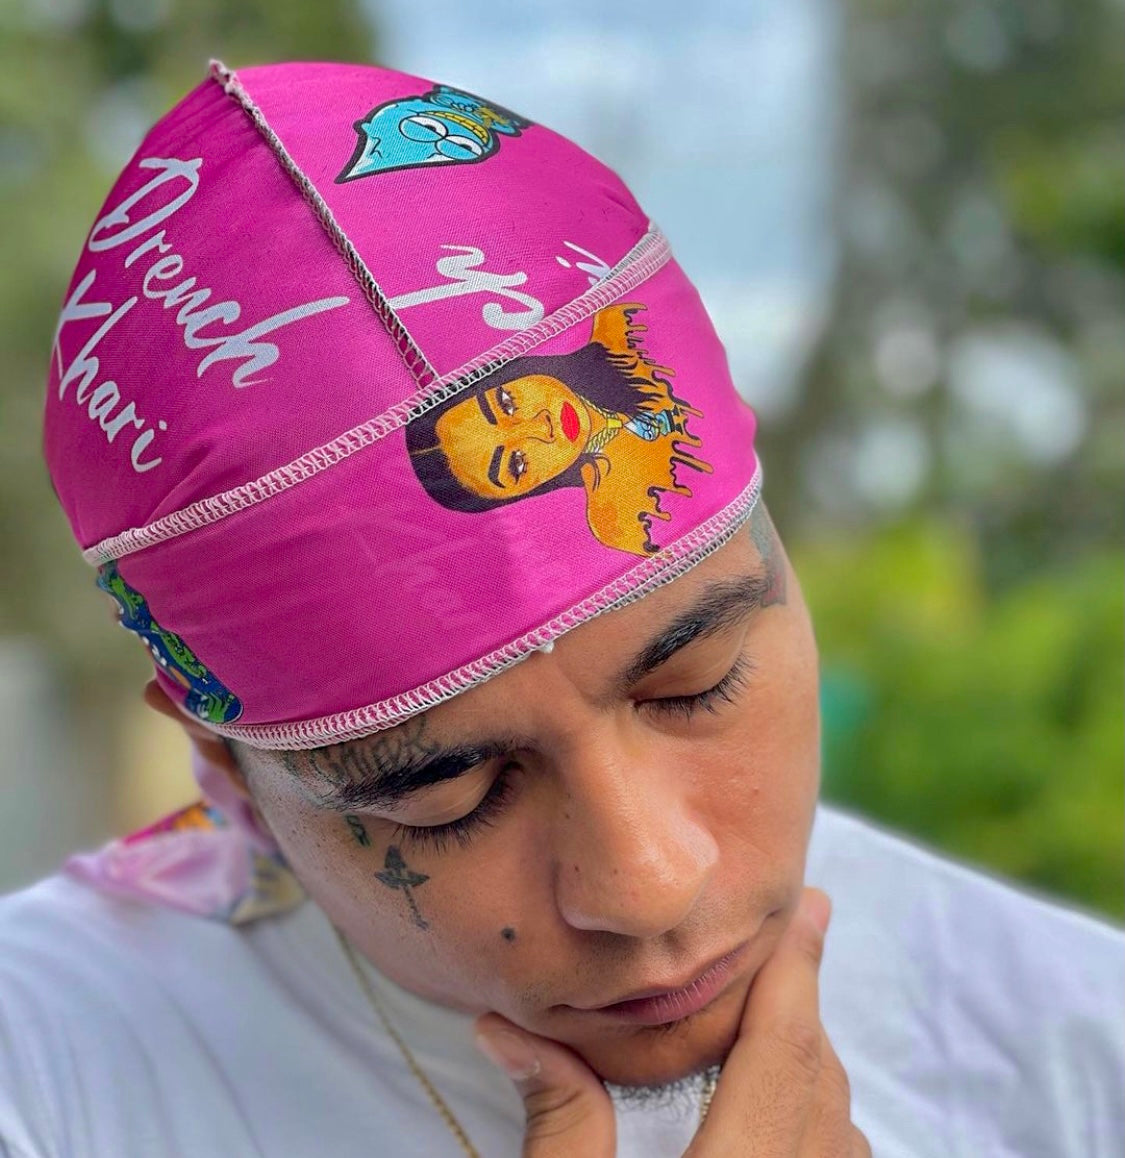 Graffiti Drench Durags ( CLICK FOR MORE COLORS )